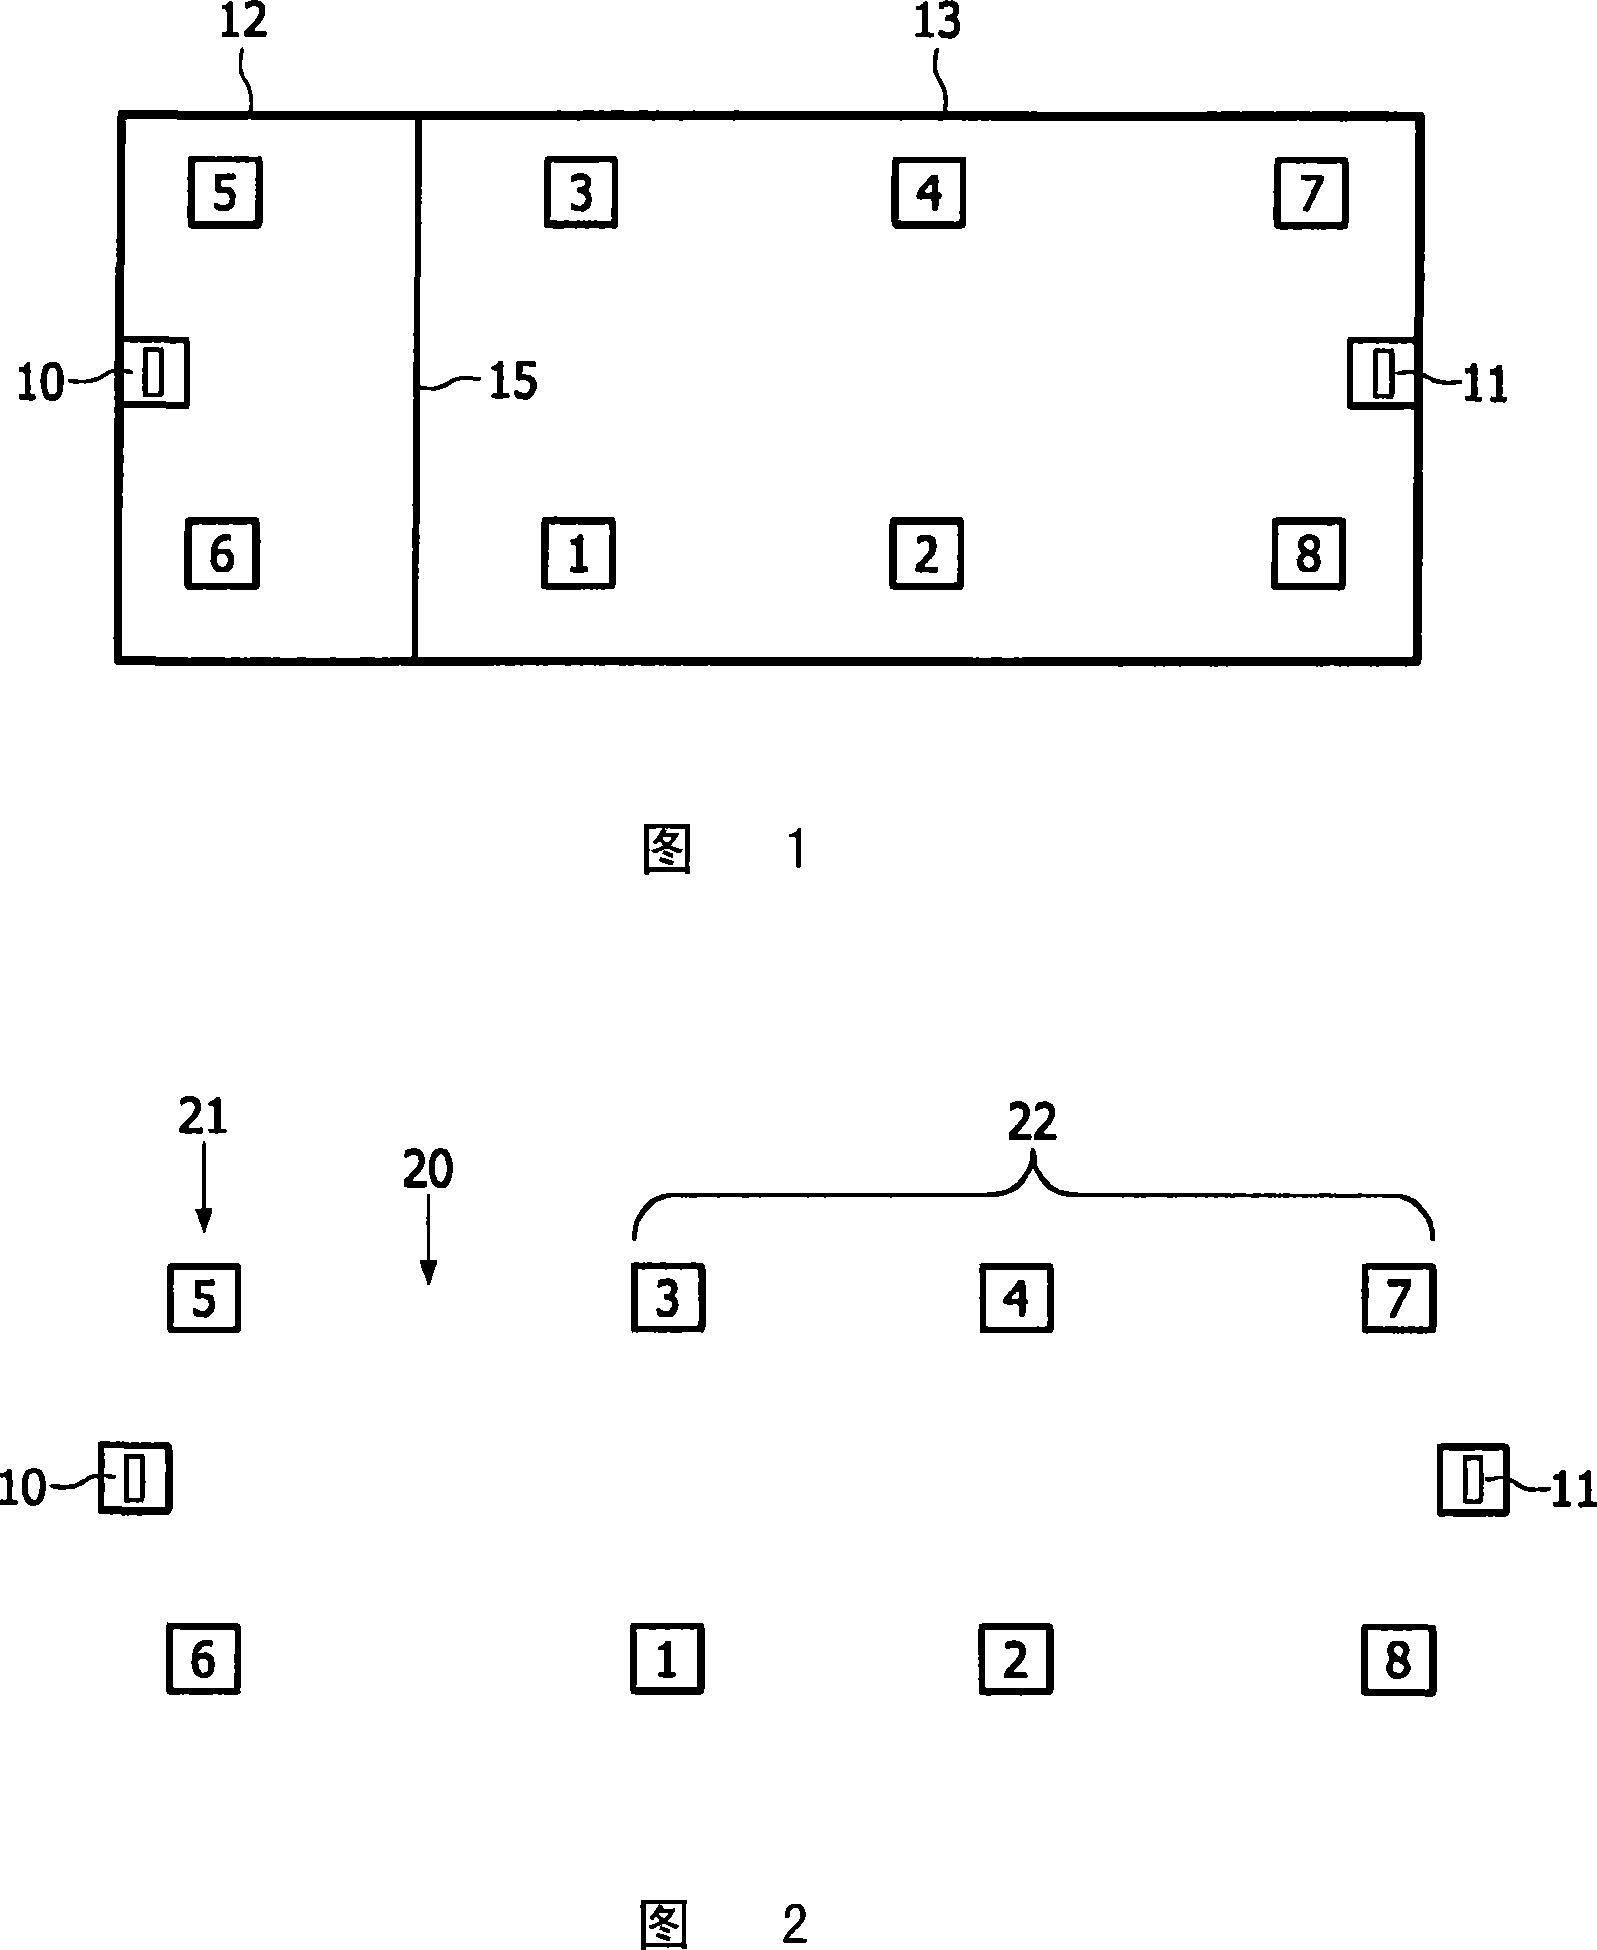 Grouping wireless lighting nodes according to a building room layout